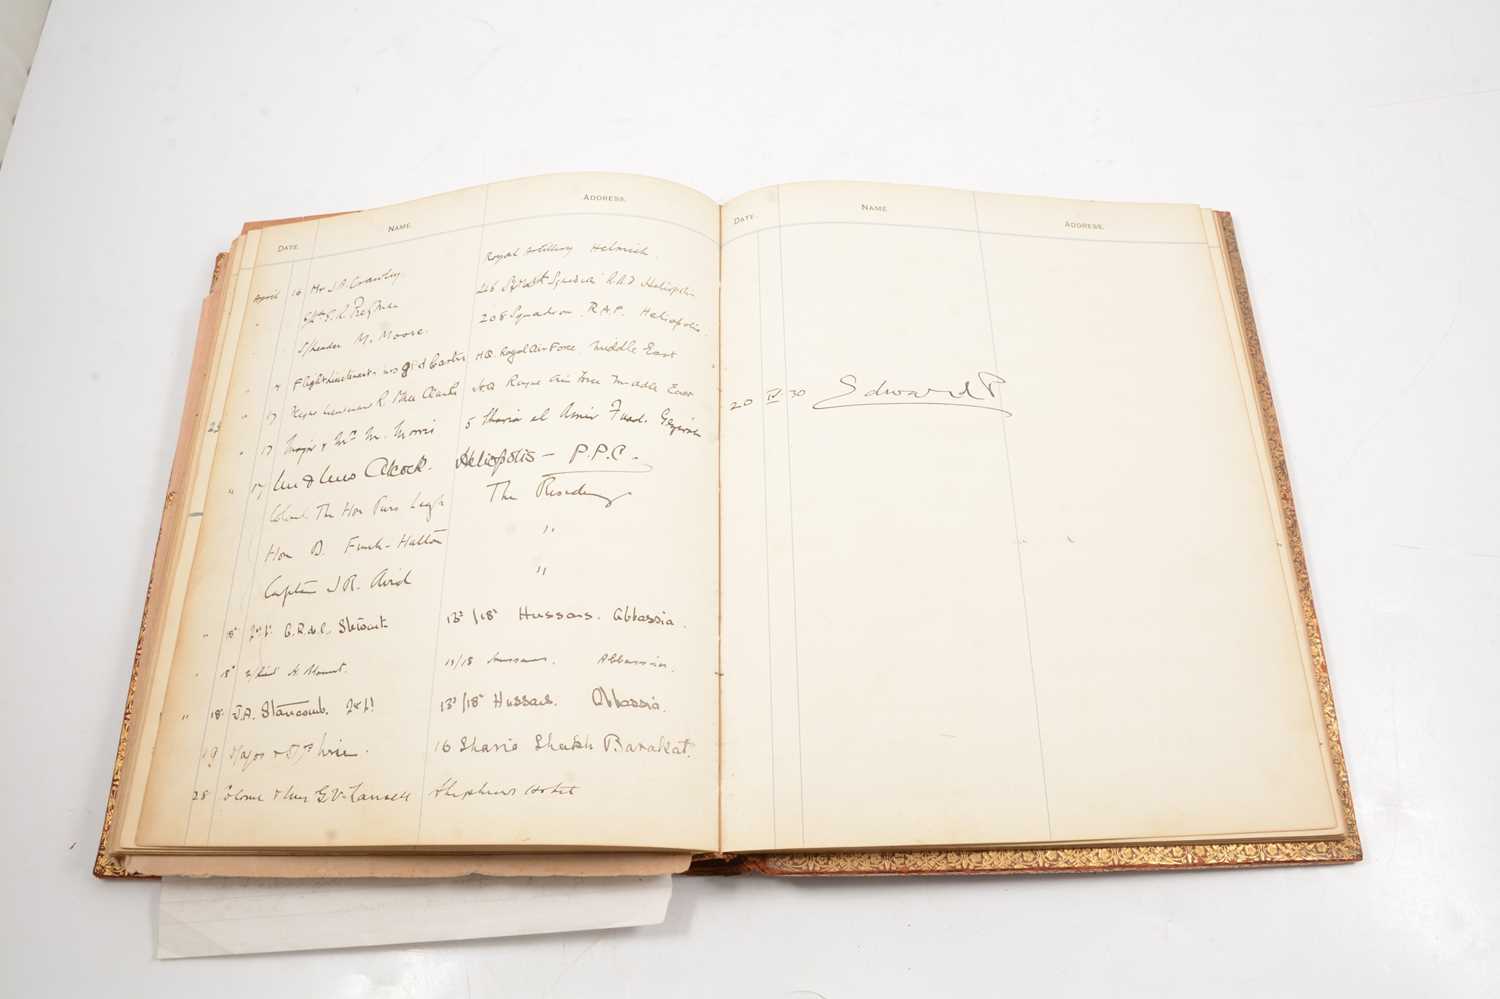 A visitors’ book for the GOC (General Officer Commanding) in Cairo dating to 1927-31. - Image 4 of 4